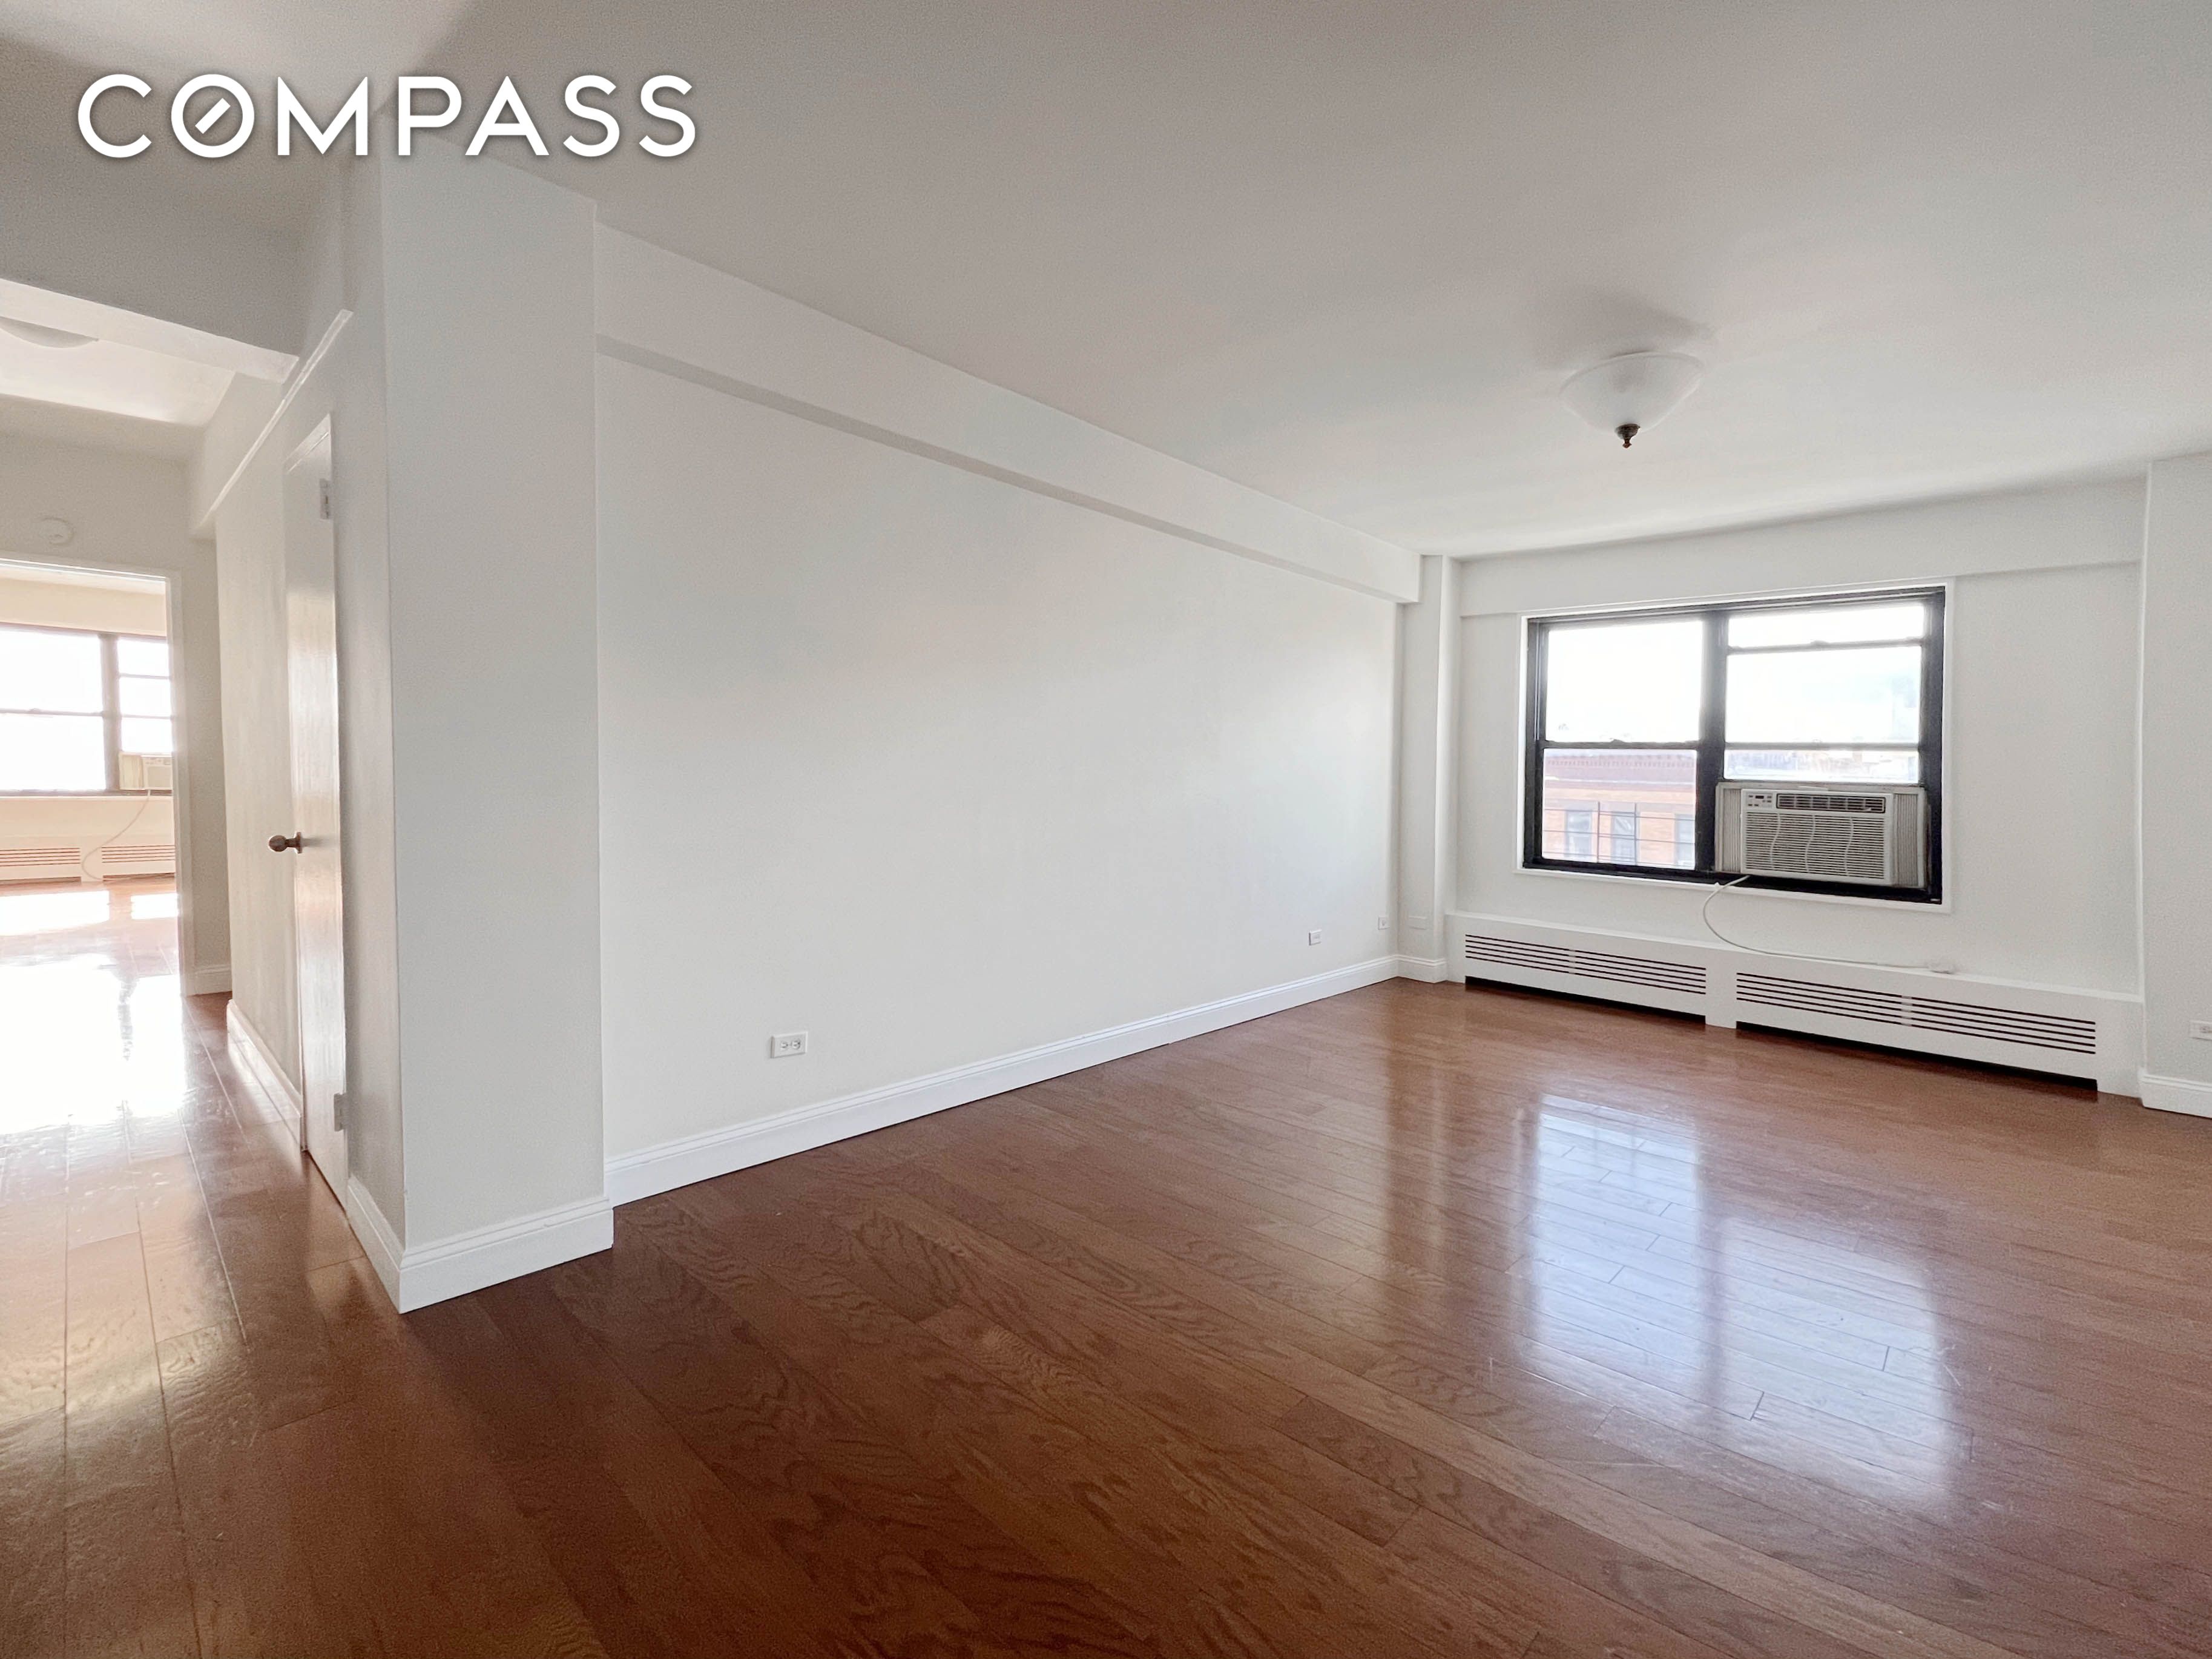 345 West 145th Street 7A3, Hamilton Heights, Upper Manhattan, NYC - 3 Bedrooms  
2 Bathrooms  
5 Rooms - 